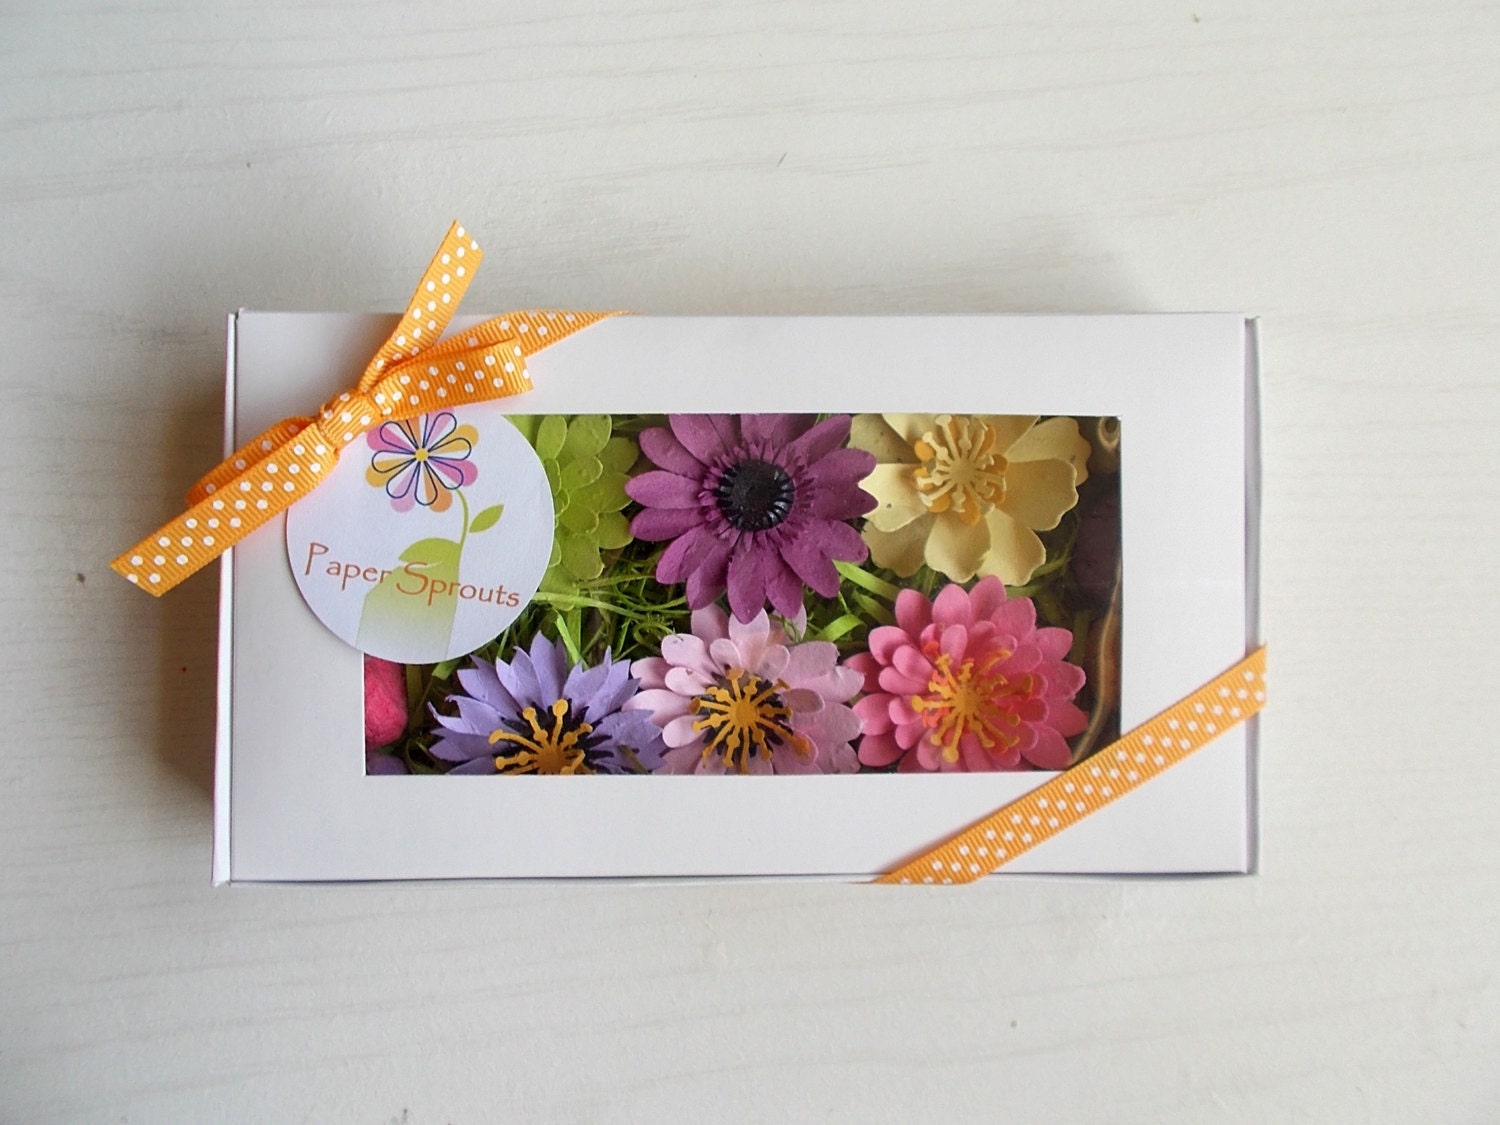 Seeded Paper Flowers and Seed Bombs Unique Gardening Gift Set - Hostess Gift, Teacher Gift, Mother's Day Gift